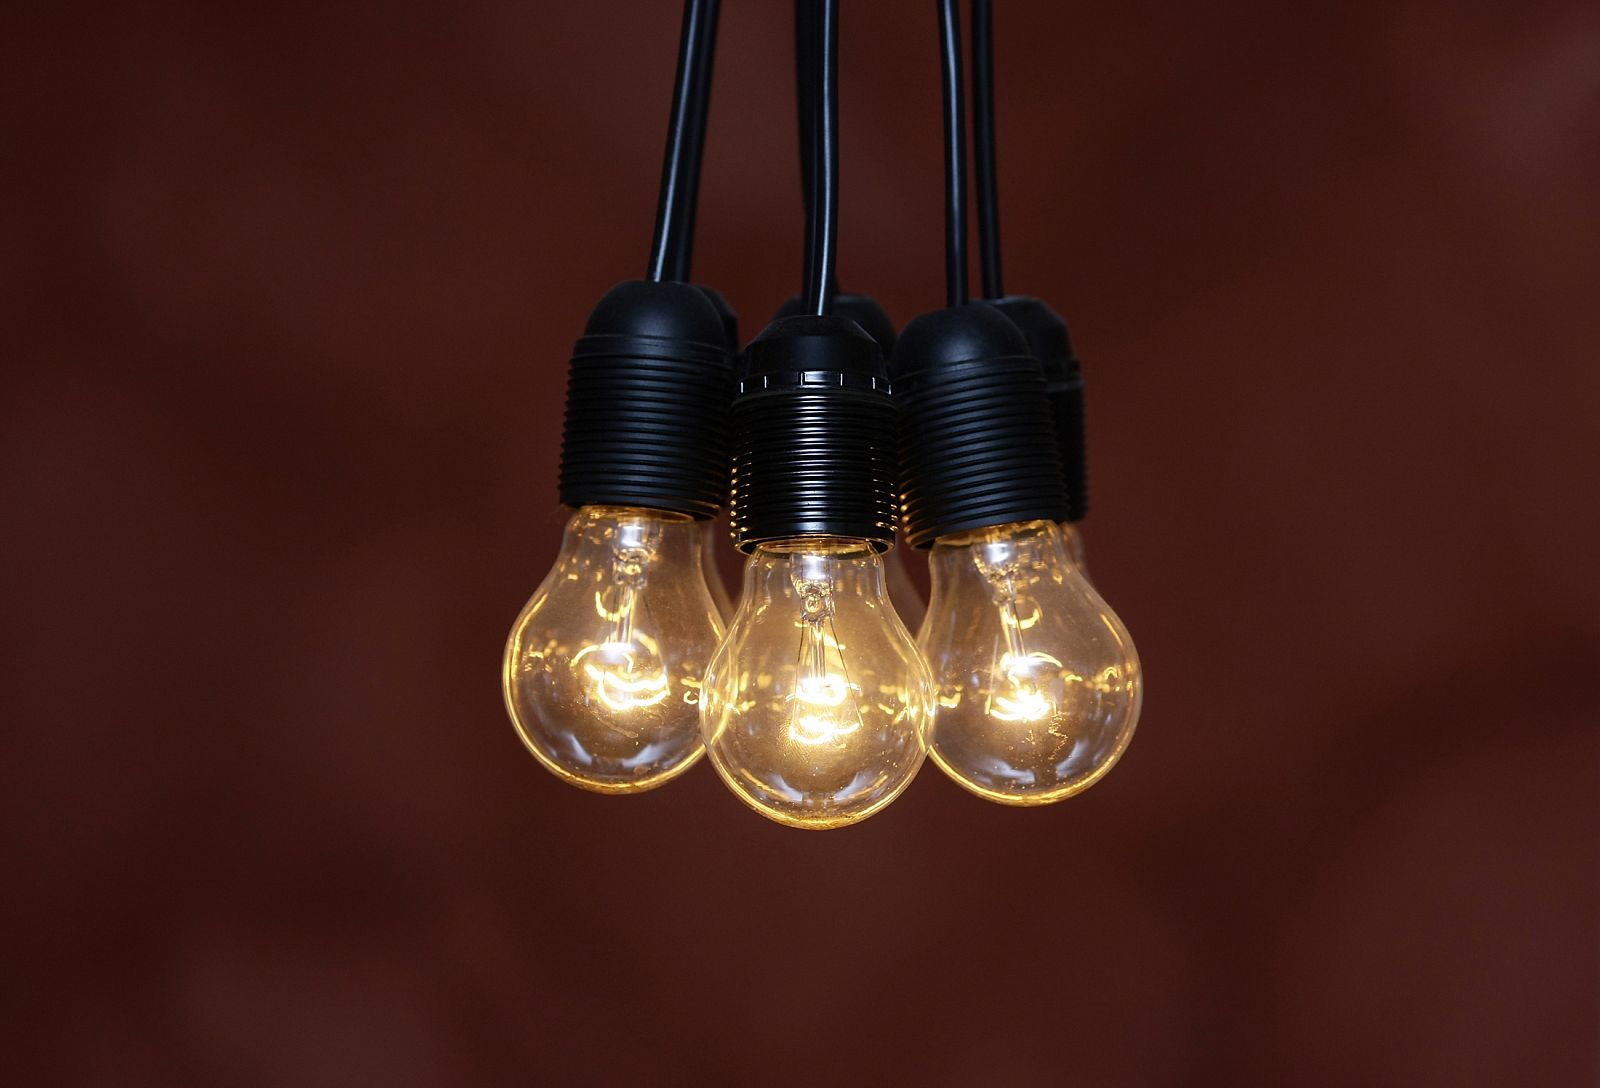 Traditional Incandescent light bulbs are seen at an apartment in Munich